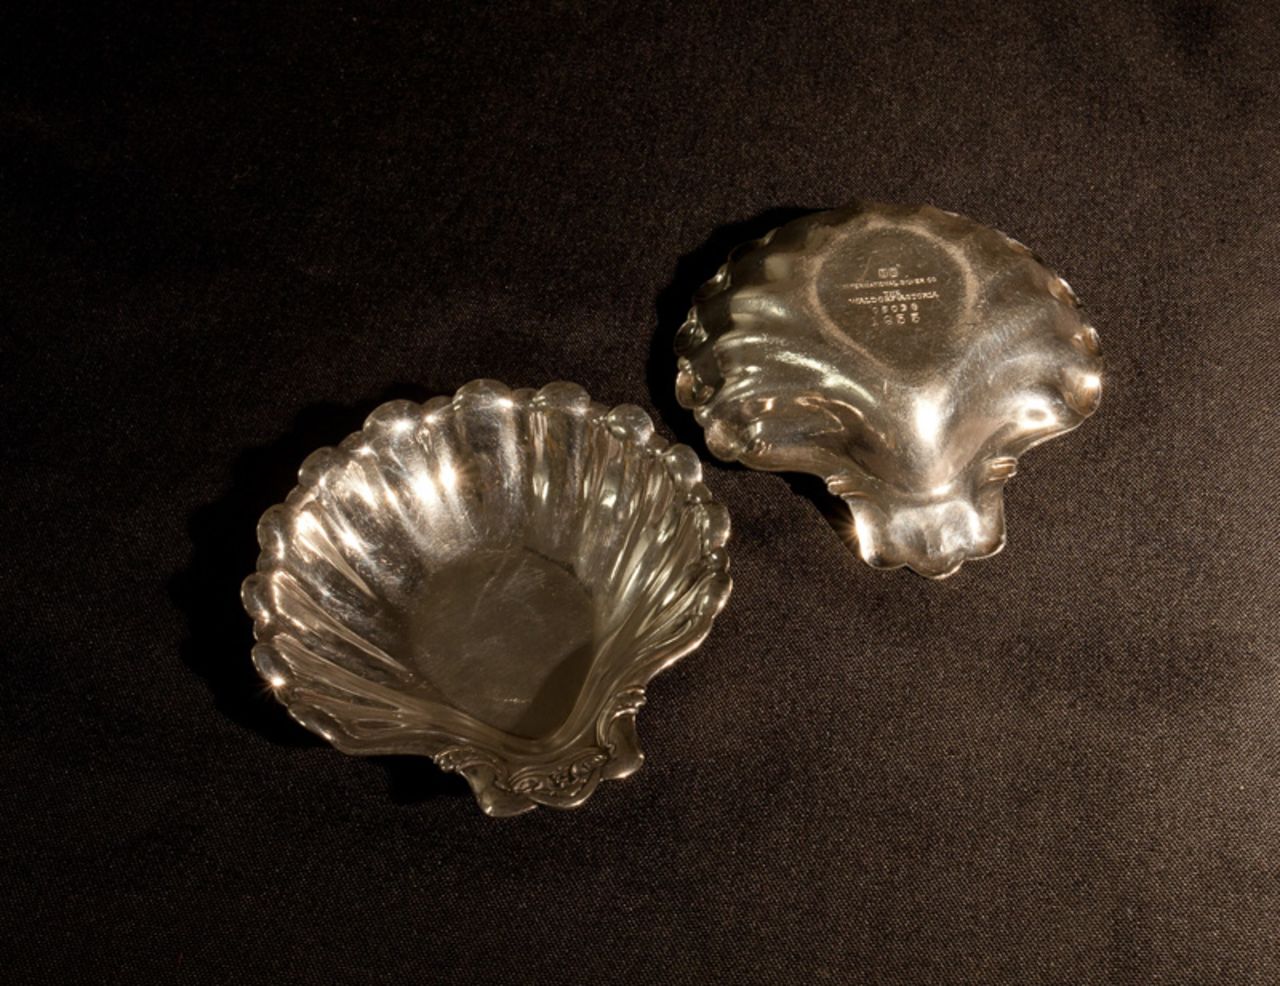 These shell-shaped nut dishes were used at the Waldorf's Peacock Alley bar in the late 1950's, providing snacks to late-night guests. The donor's father is thought to have spirited the stylish utensils away with him after a brief stay in the hotel during this period. 